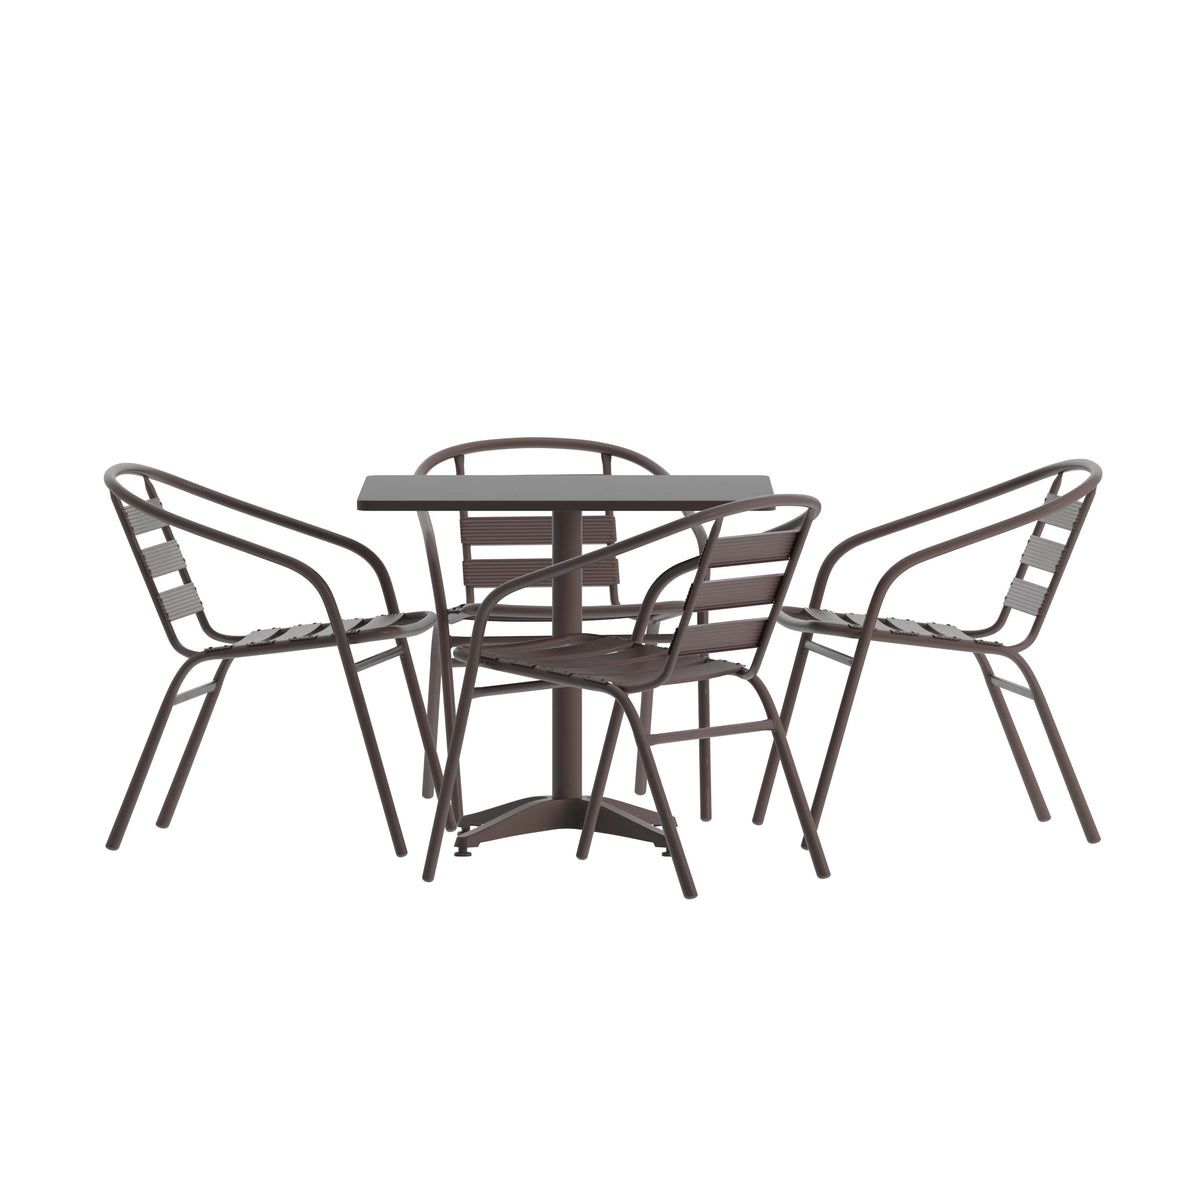 Bronze |#| Modern 31.5inch Square Glass Framed Glass Table with 4 Bronze Slat Back Chairs